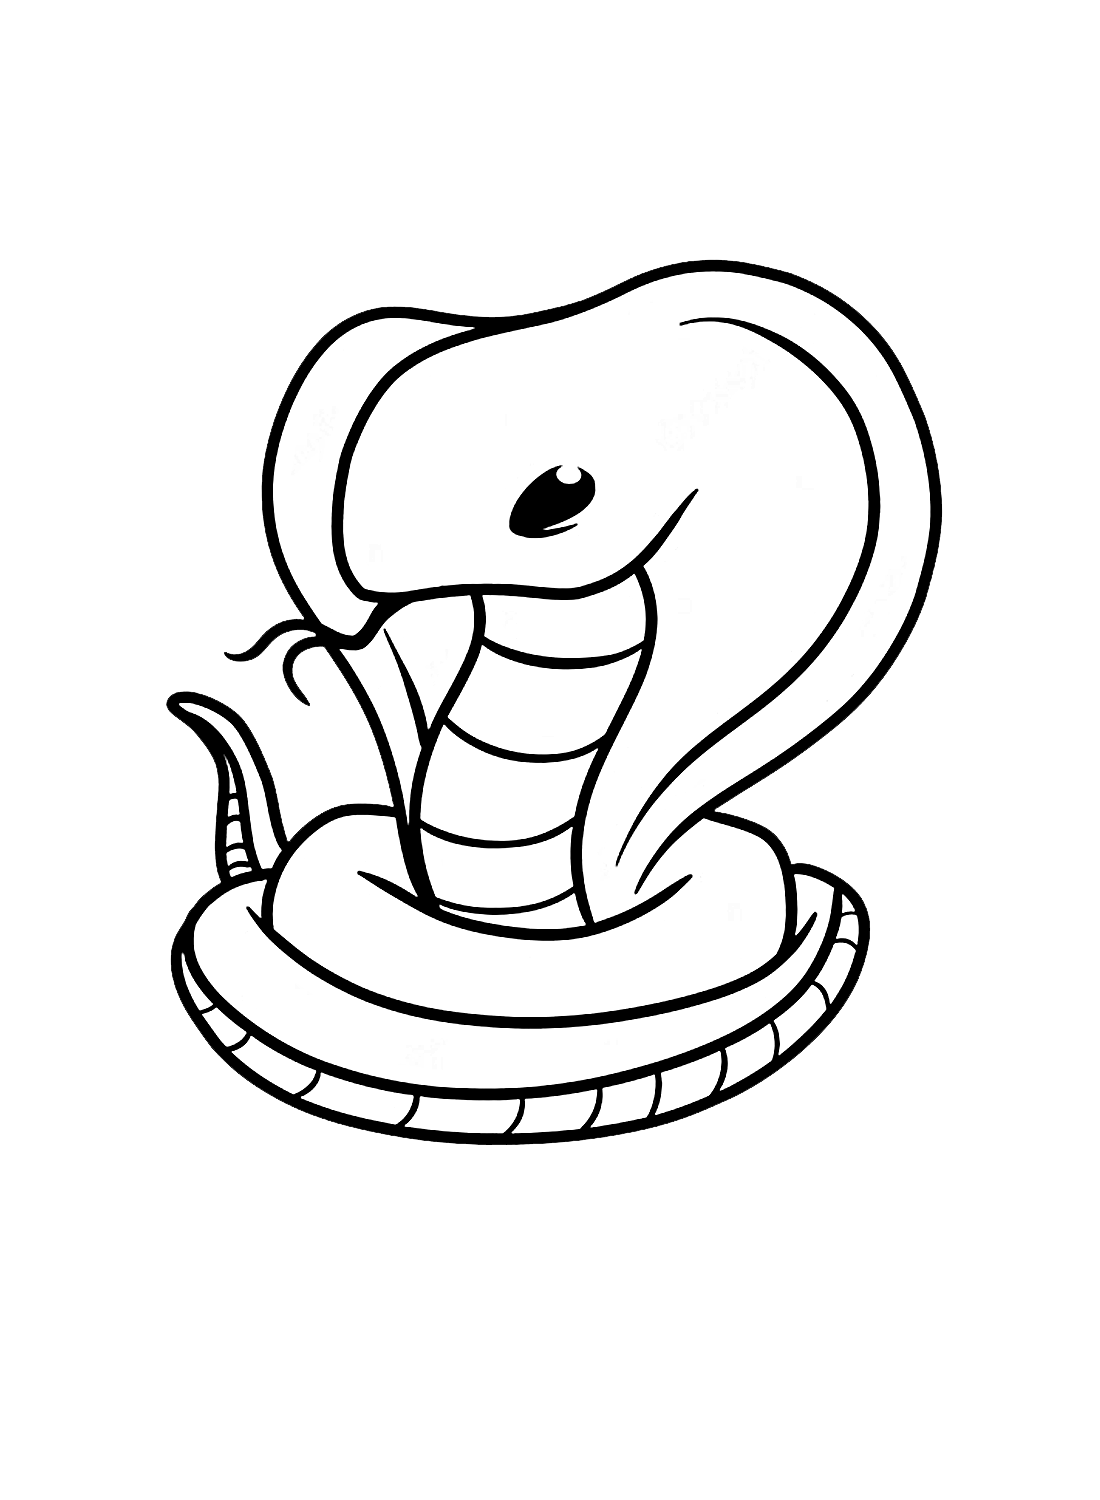 Cute Carrtoon Cobra Coloring Page